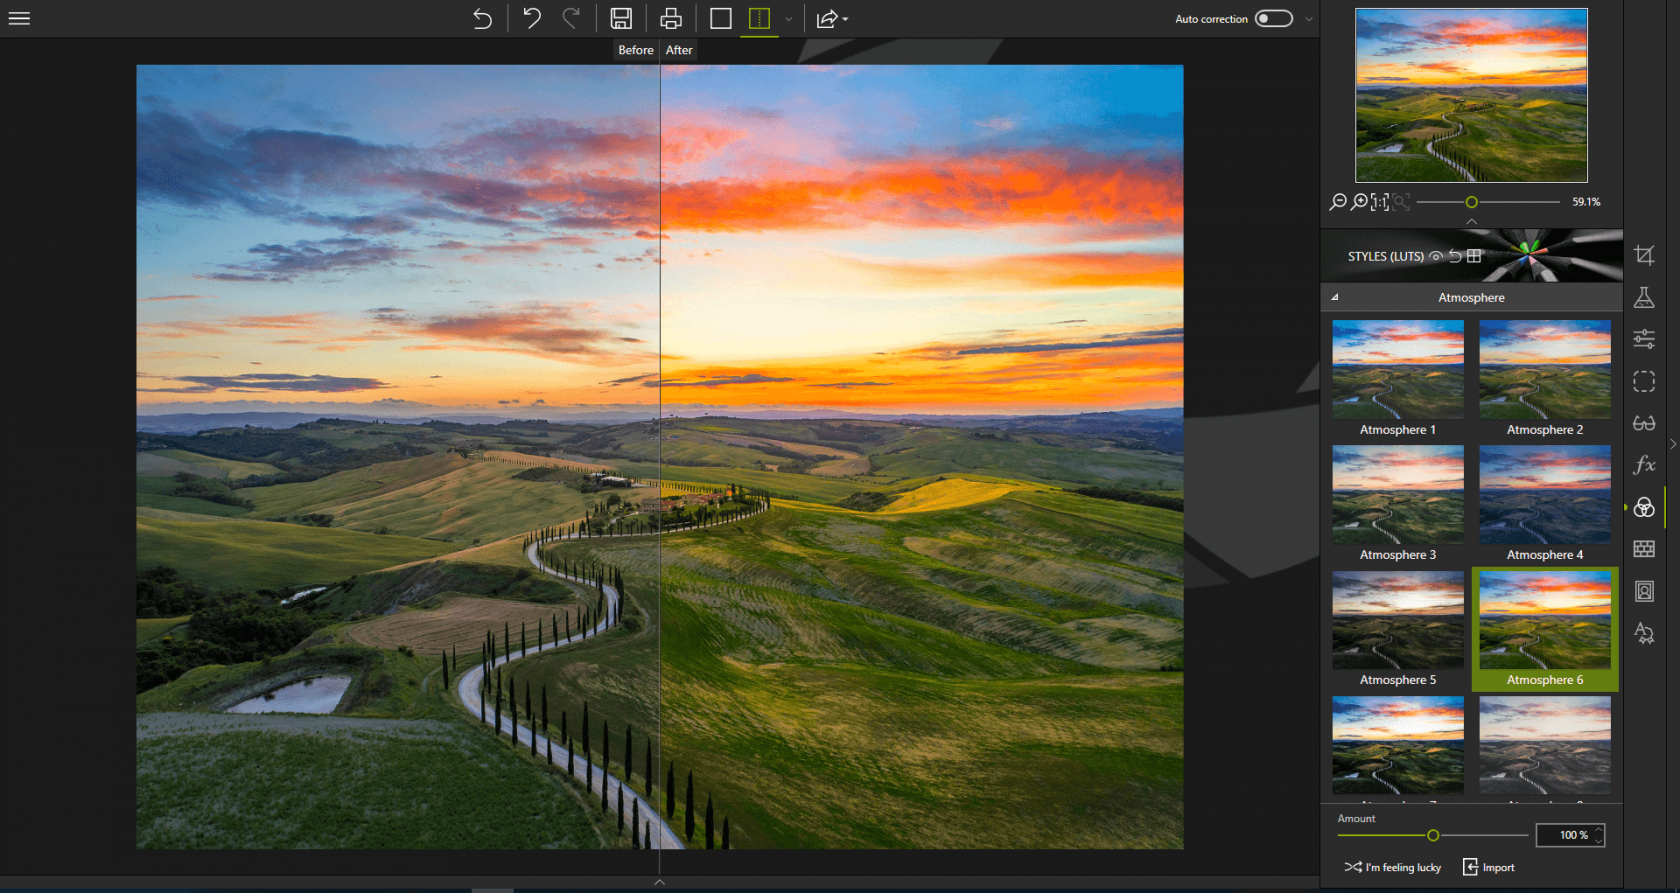 best photo editing software